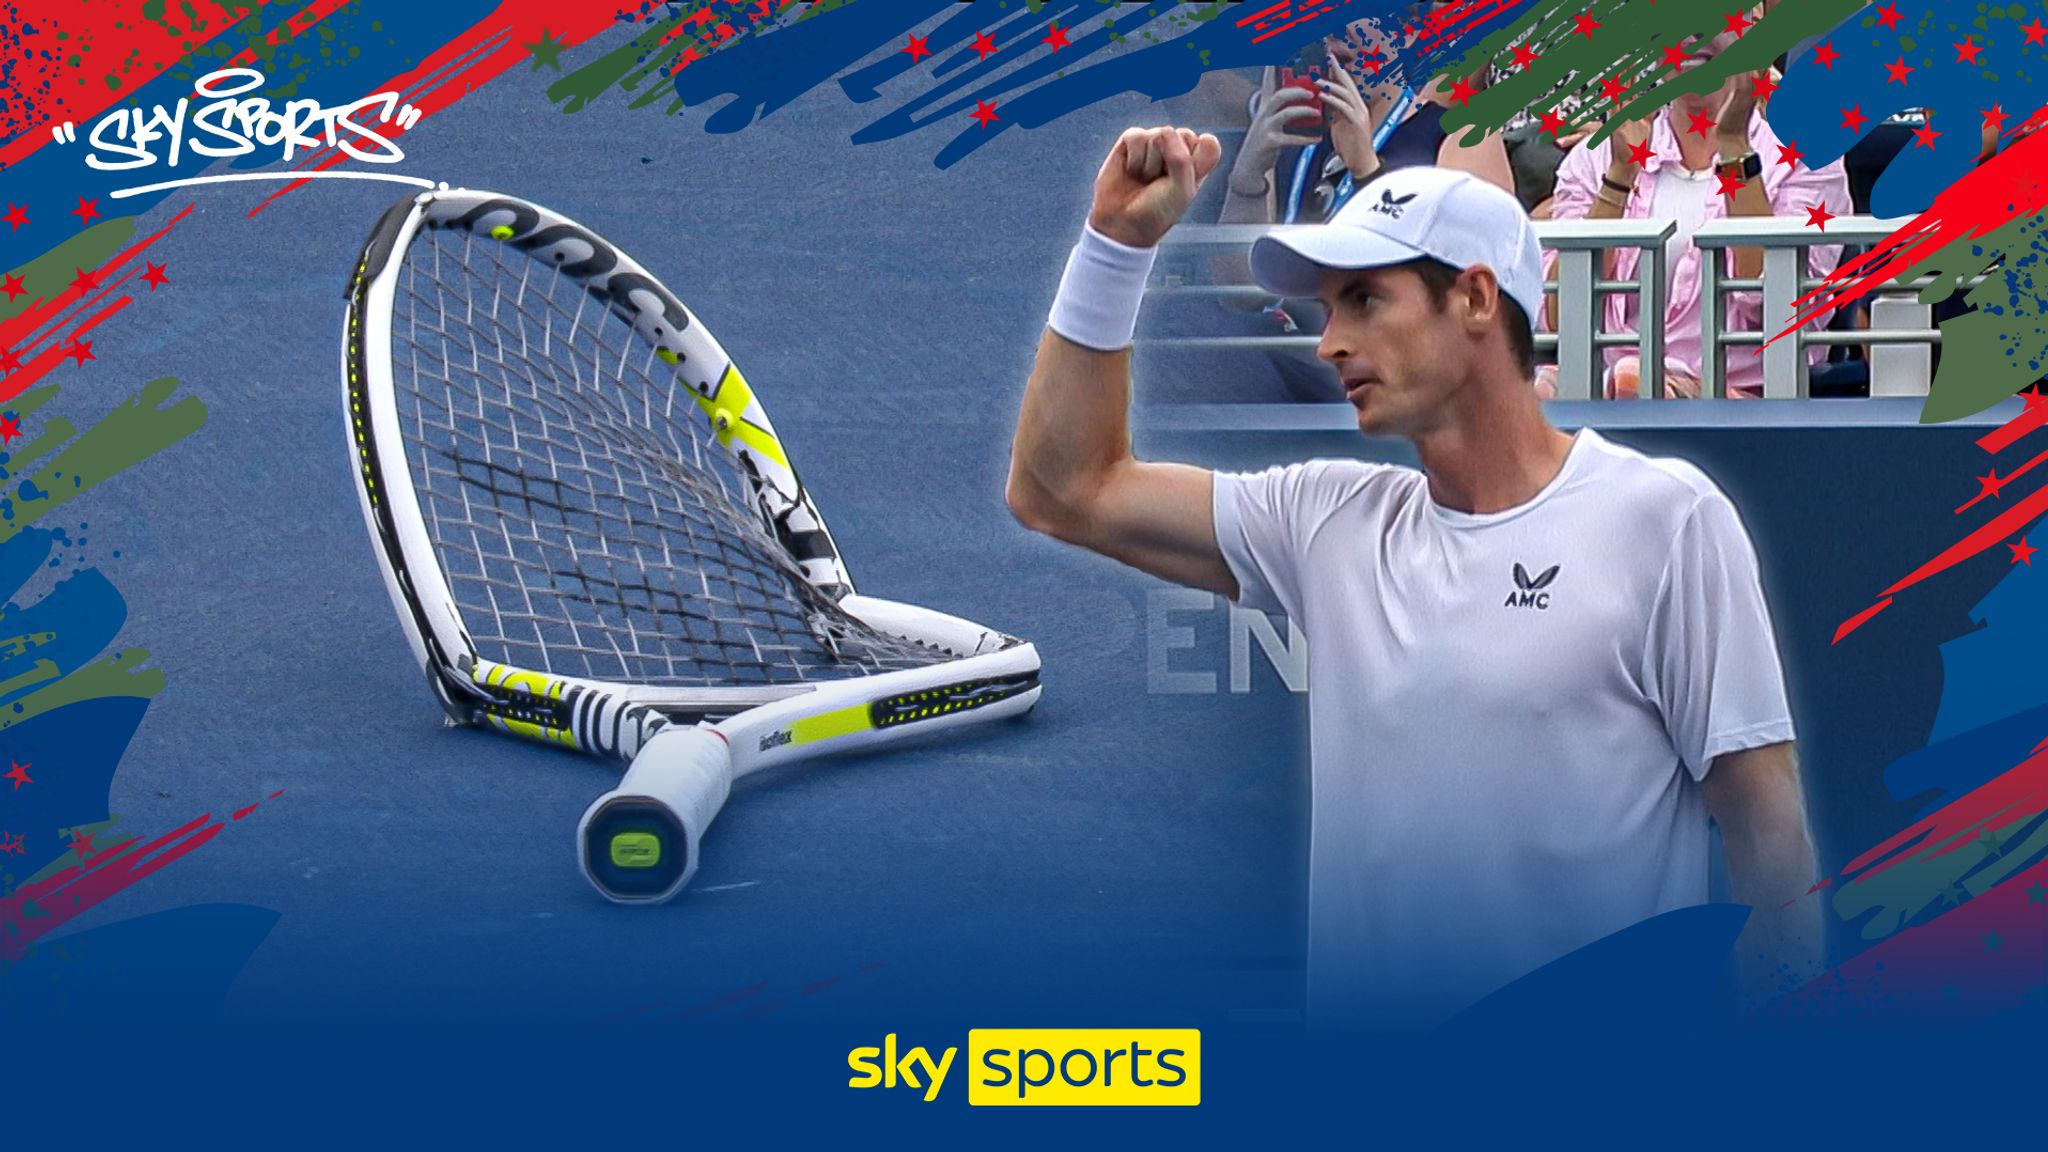 Corentin Moutet smashes racket after Andy Murray breaks back! Tennis News Sky Sports